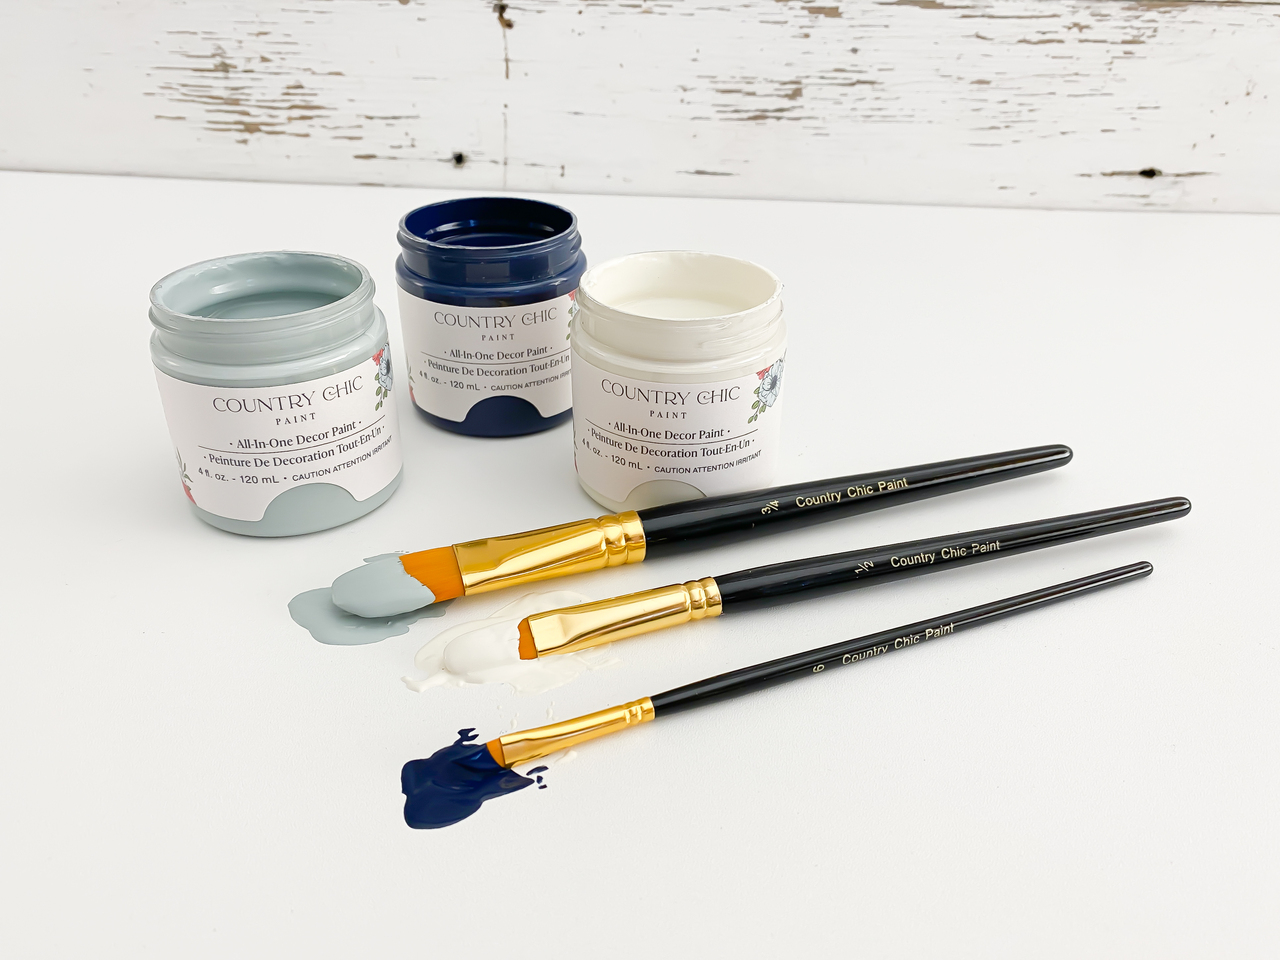 artist brushes dipped in paint with three paint jars